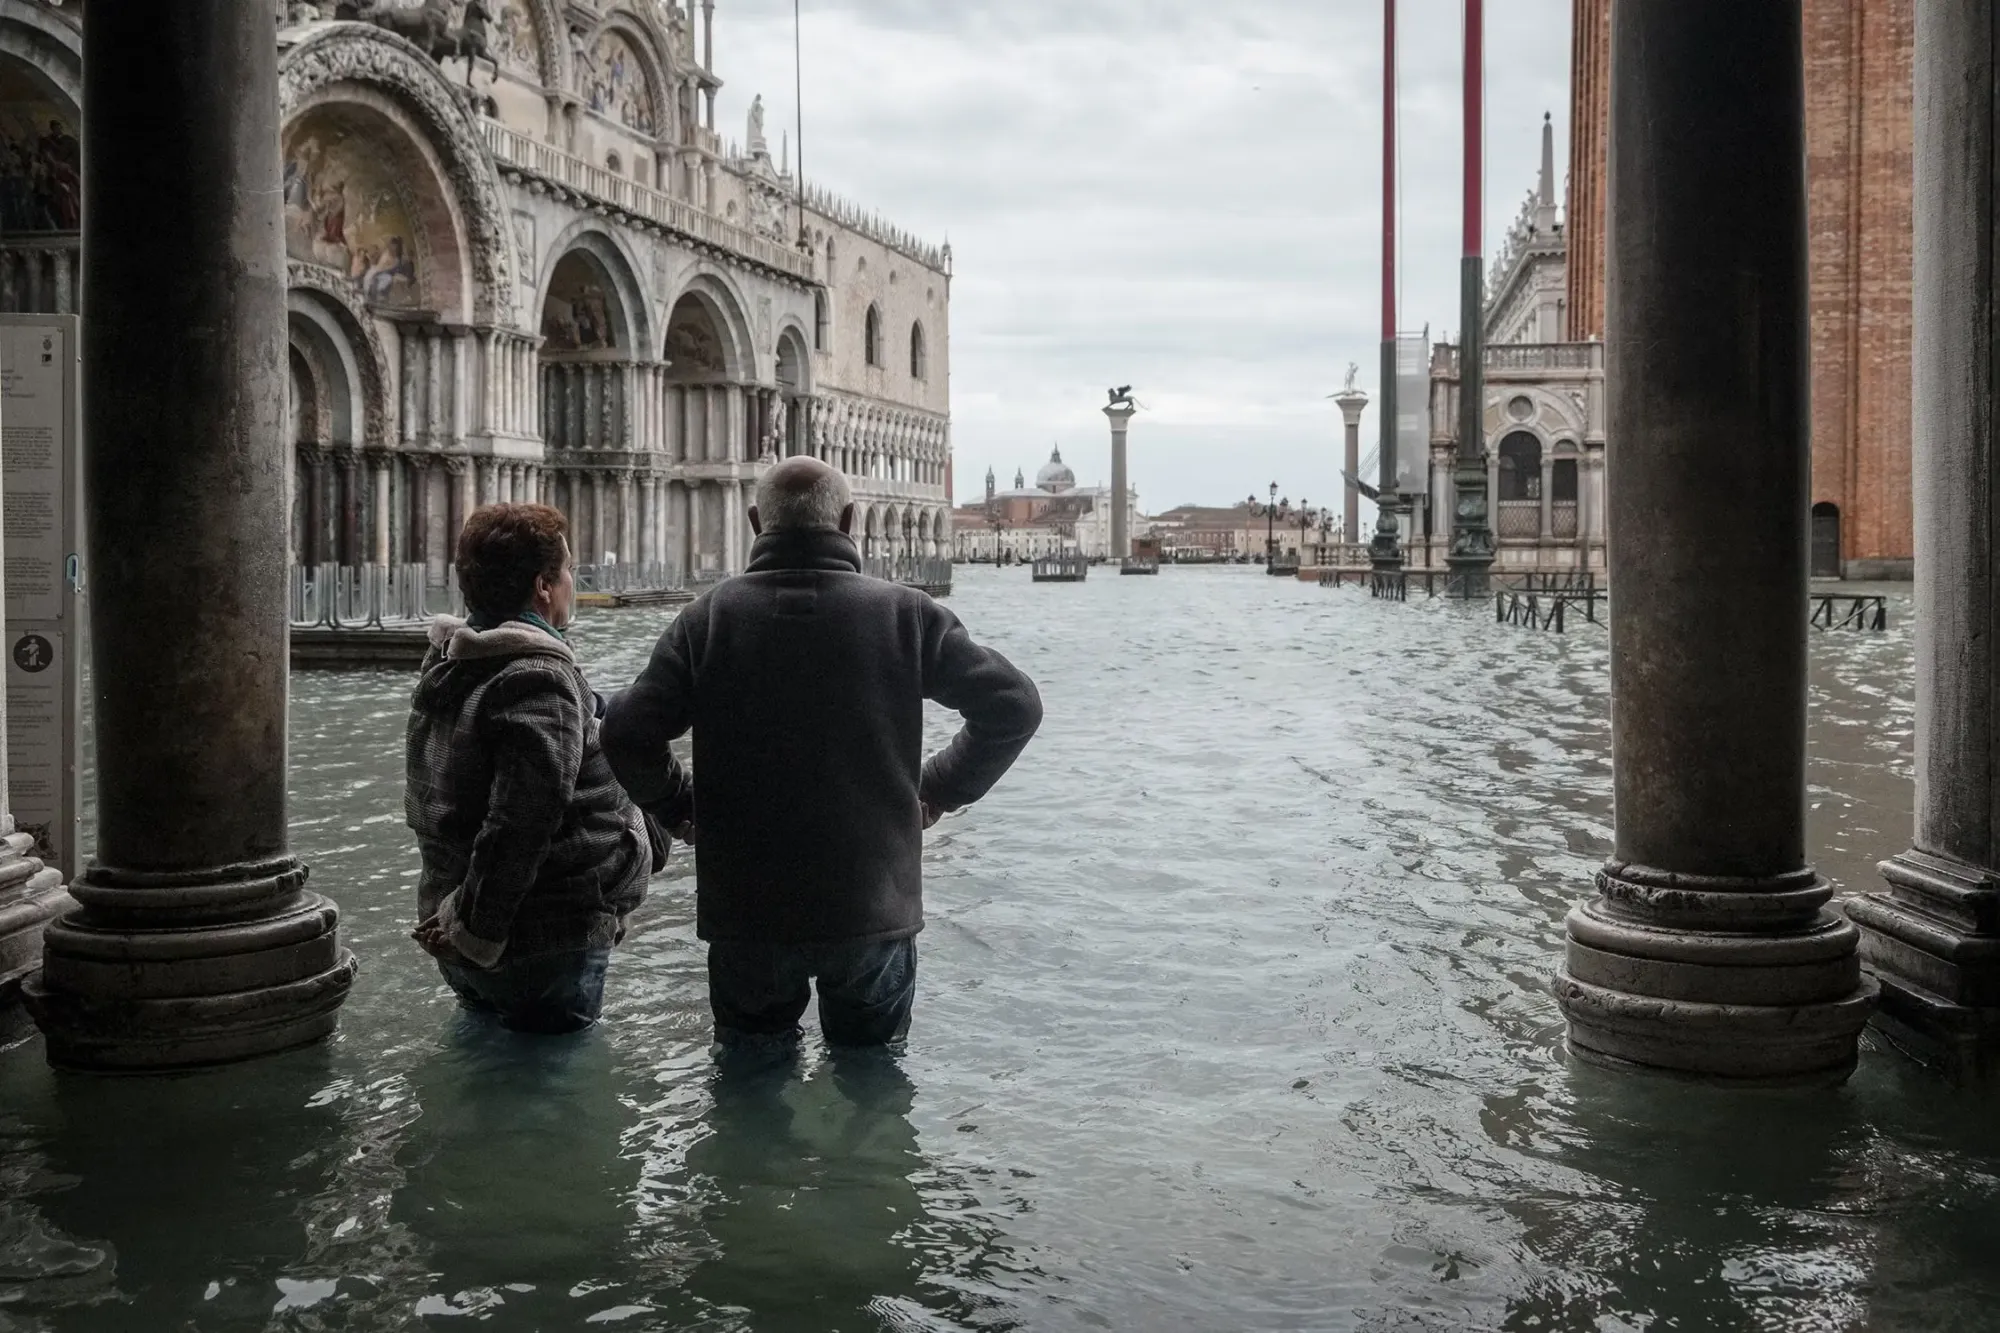 Venice's flooding has become another tourist attraction.